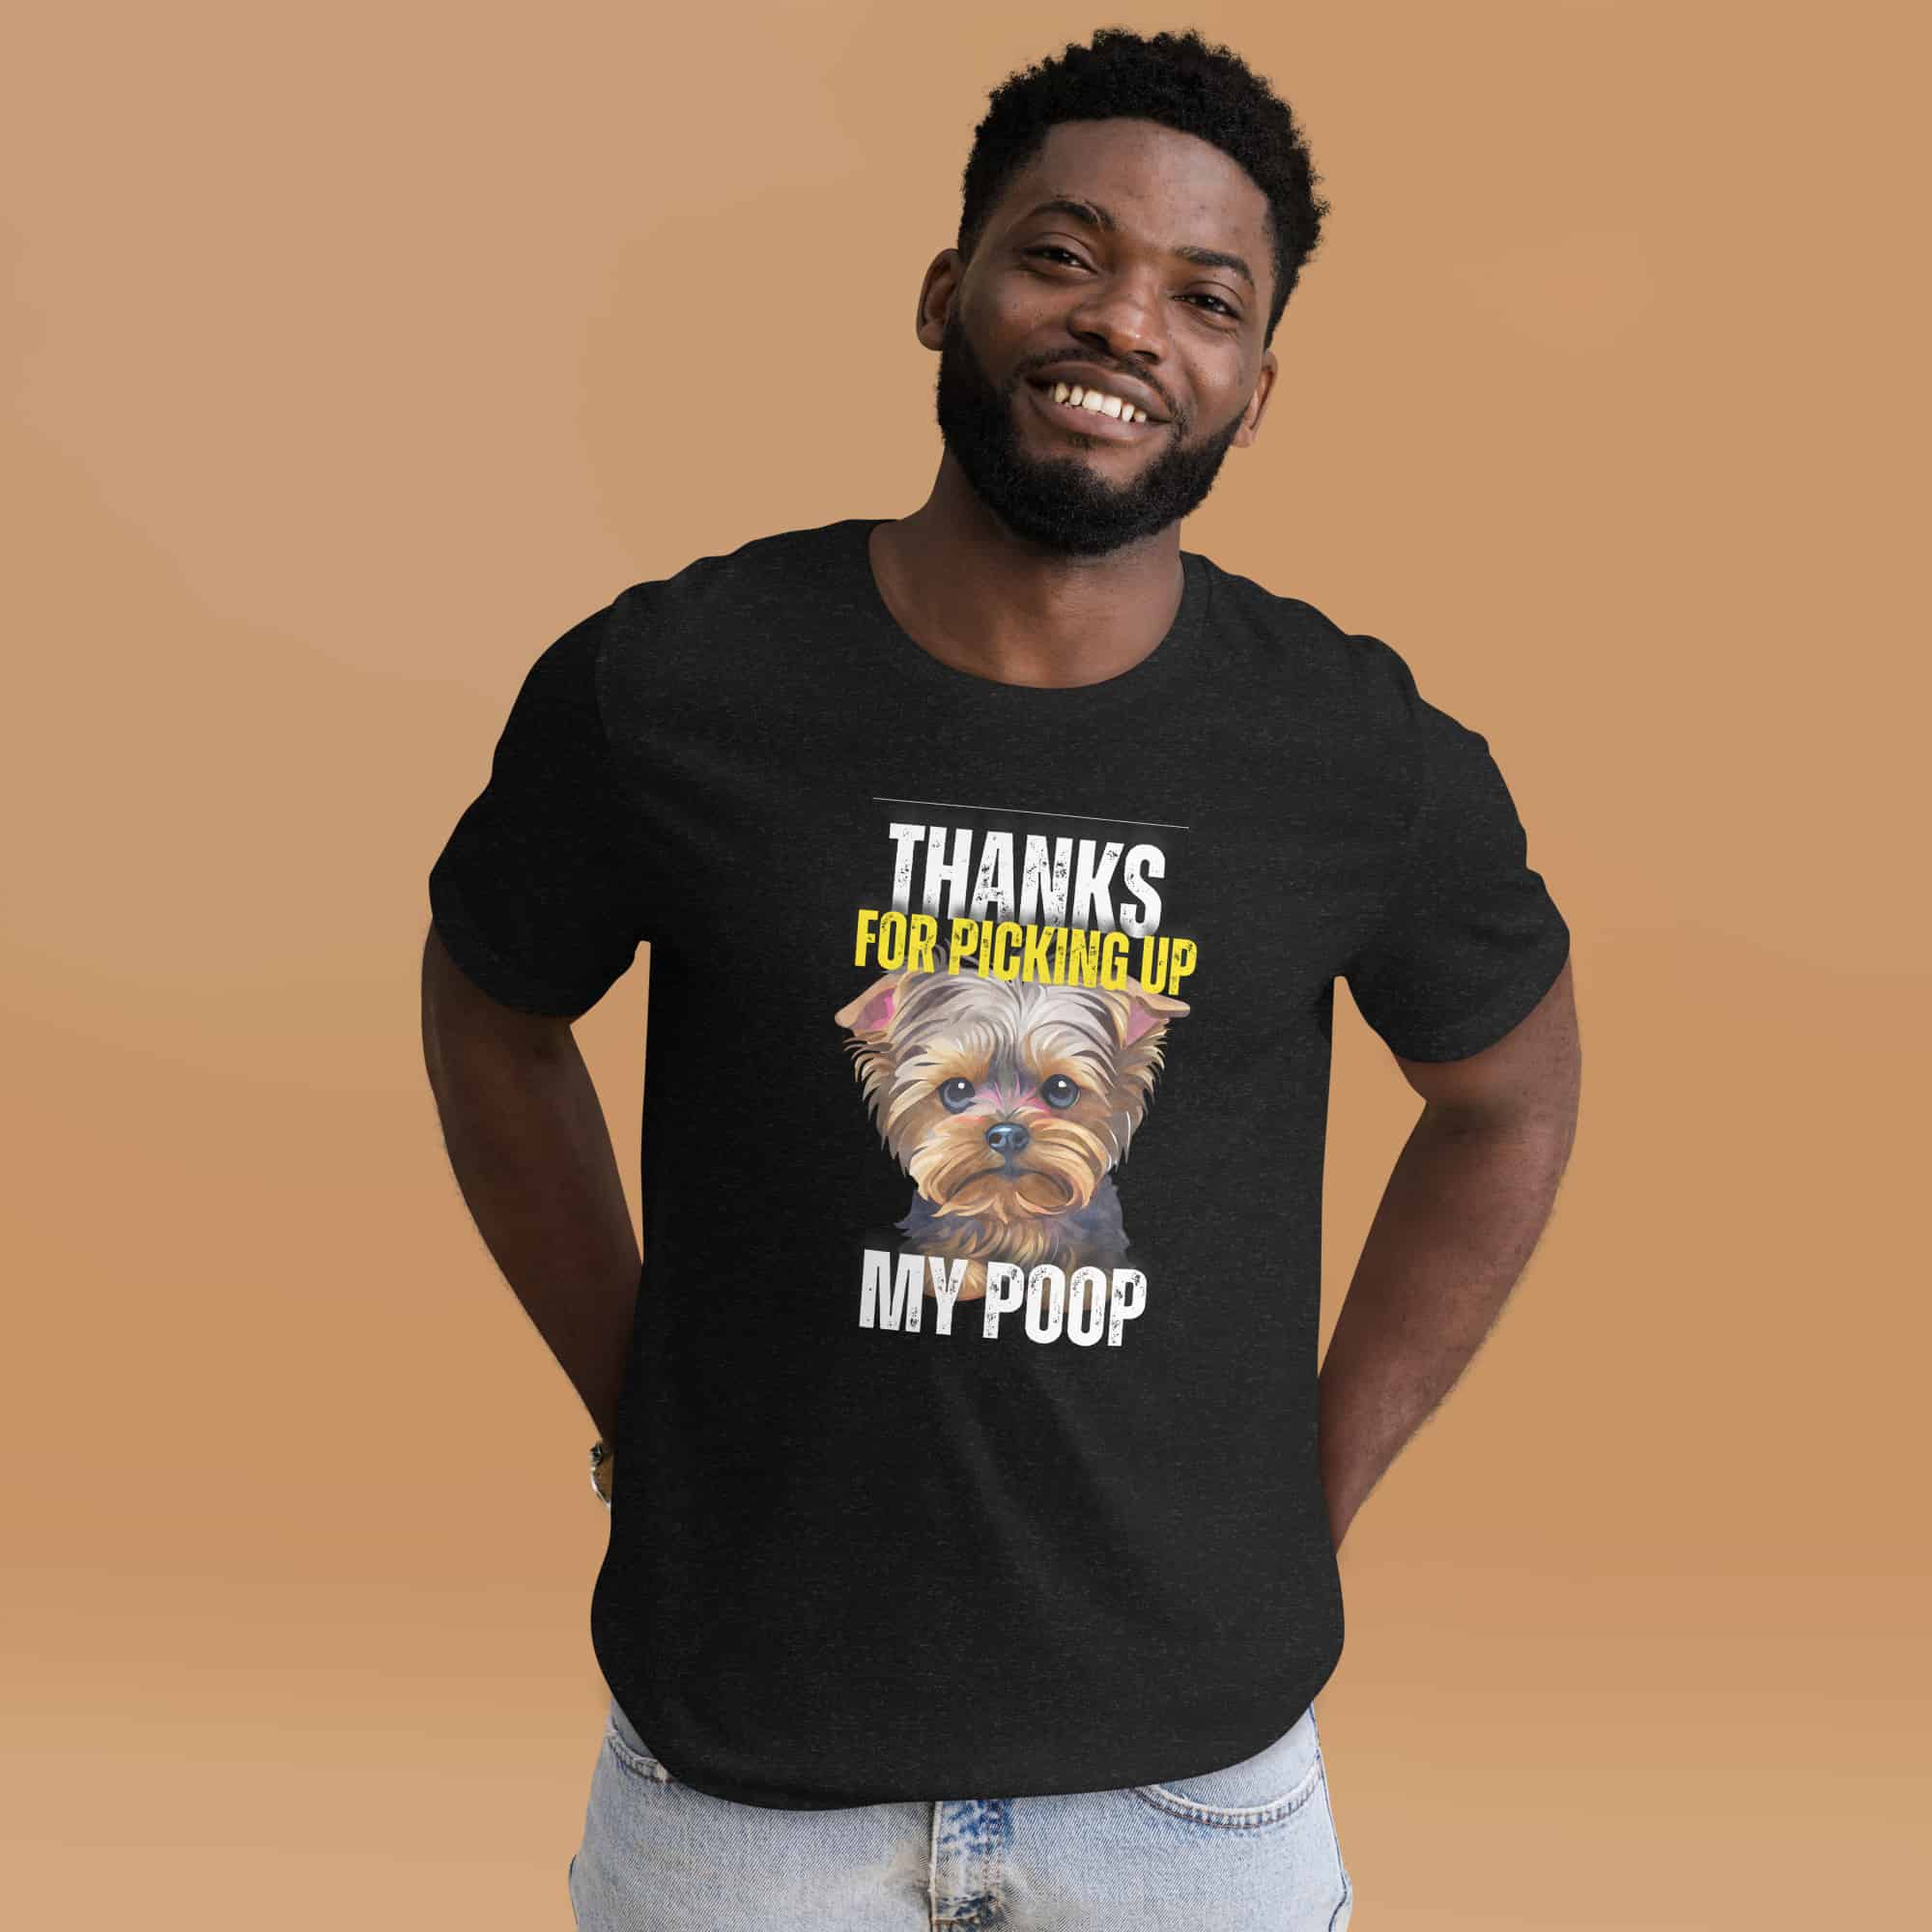 Thanks For Picking Up My POOP Funny Poodles Unisex T-Shirt. Black Heather. Male